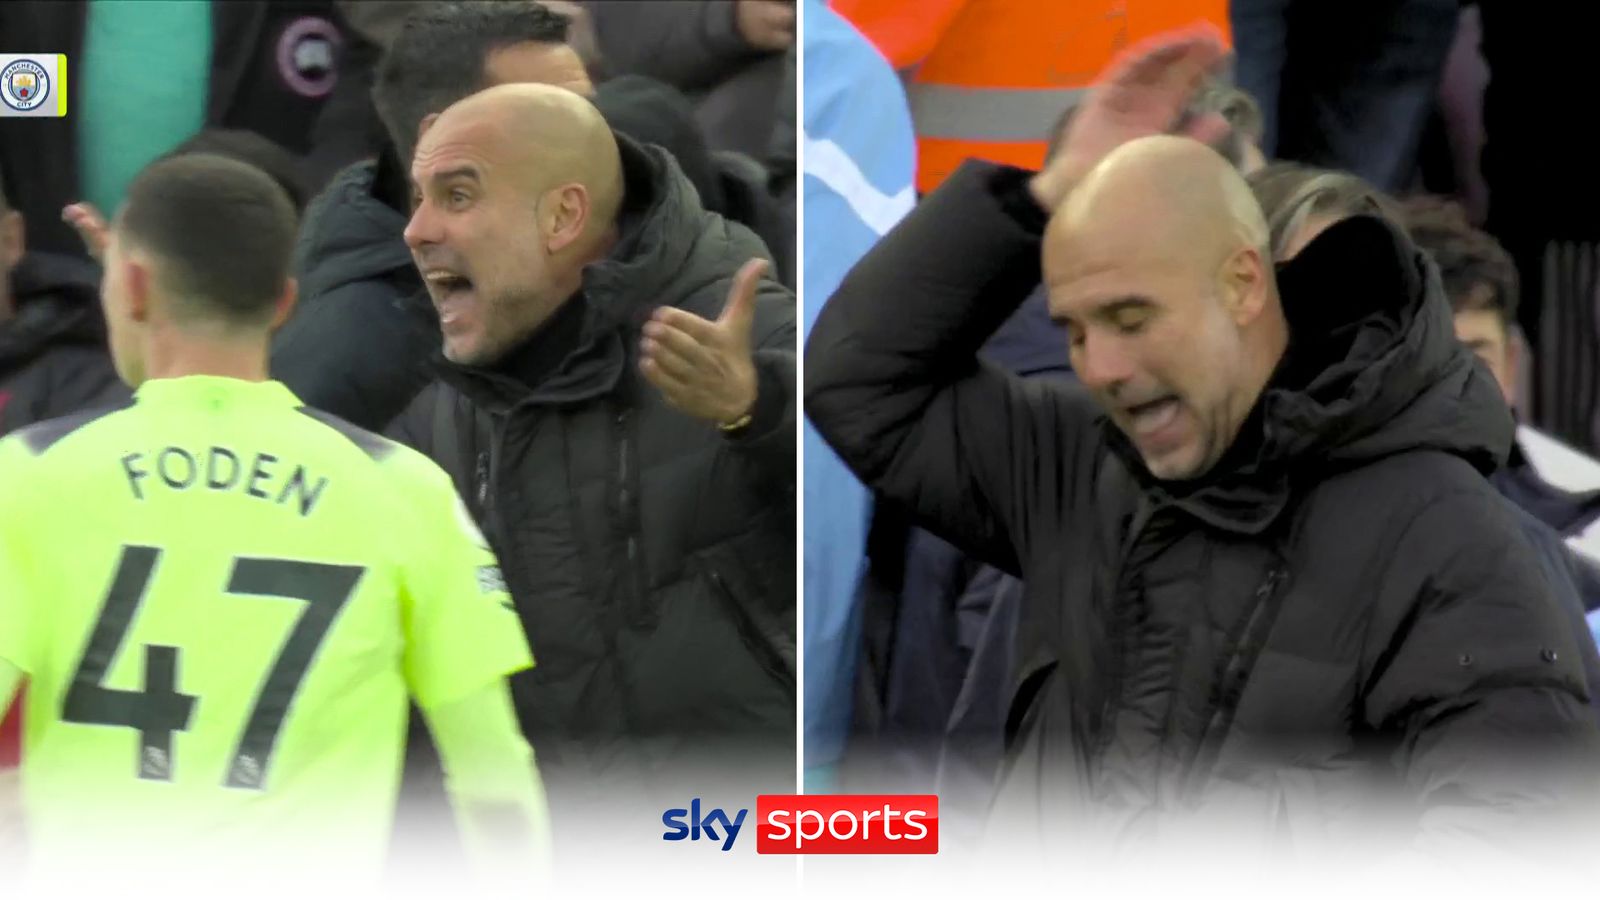 Coins thrown at Pep Guardiola in Liverpool loss as Reds condemn Man City chants